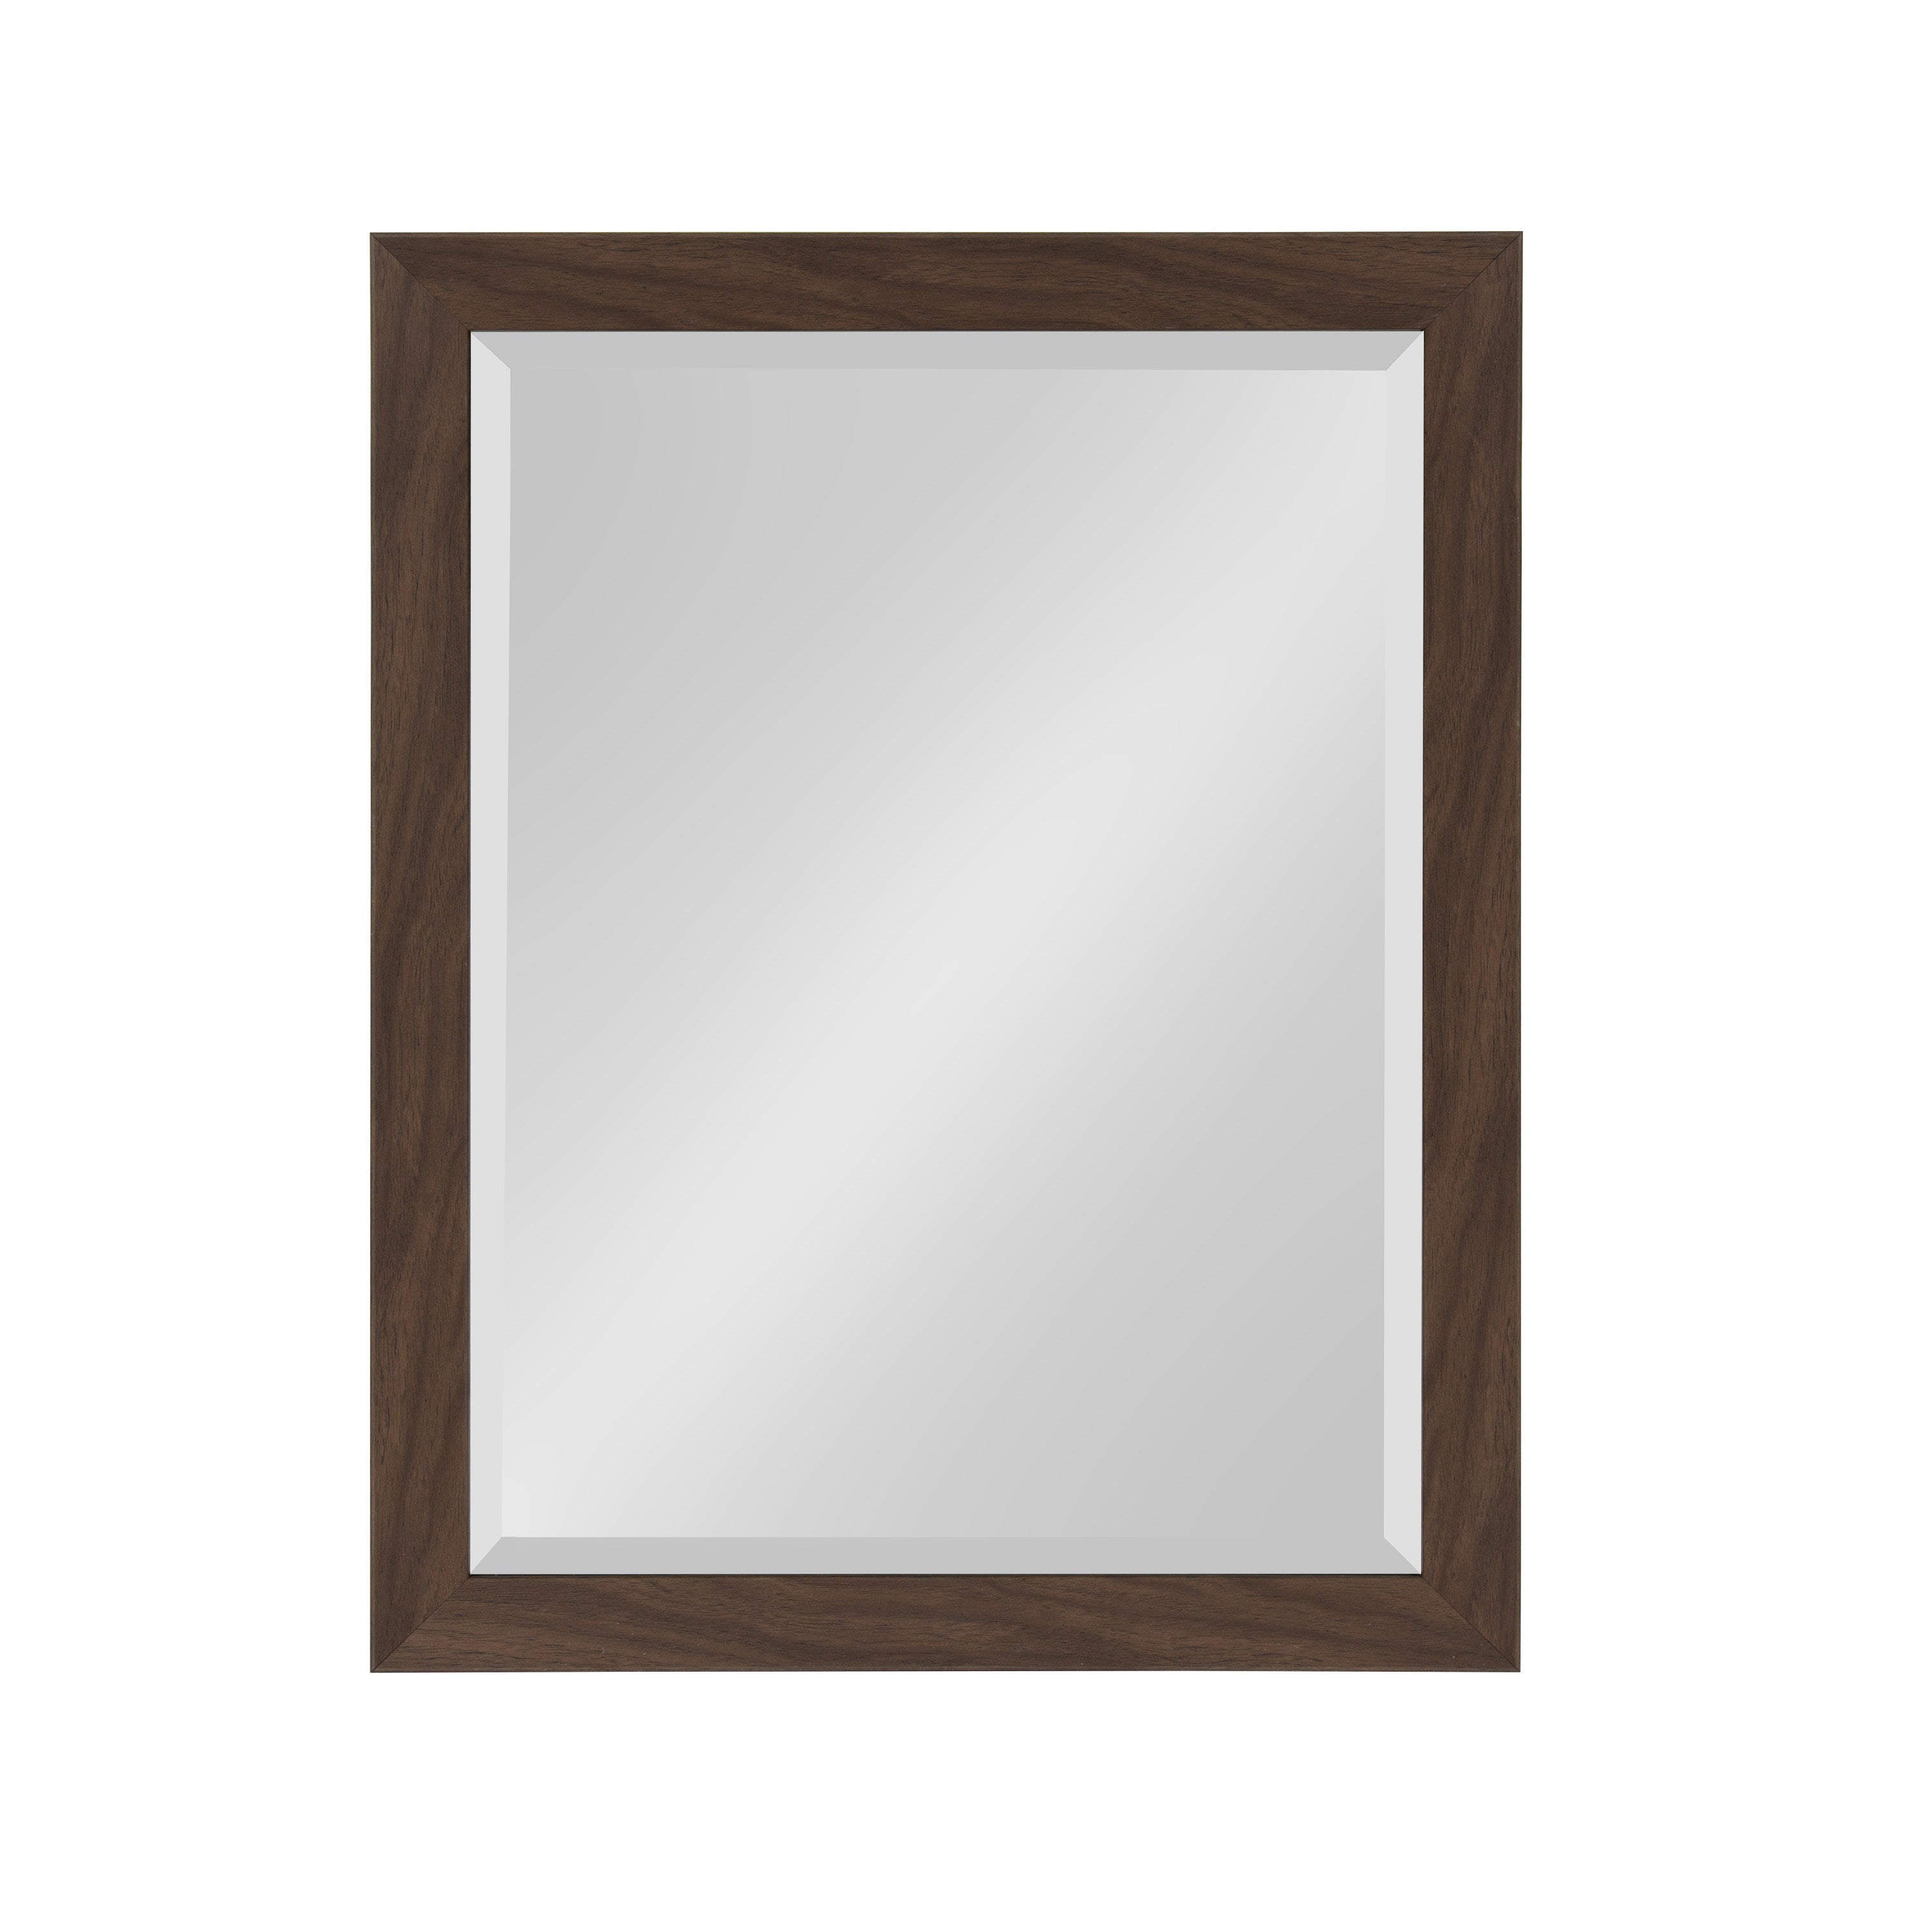 Beatrice Framed Wall Mirror